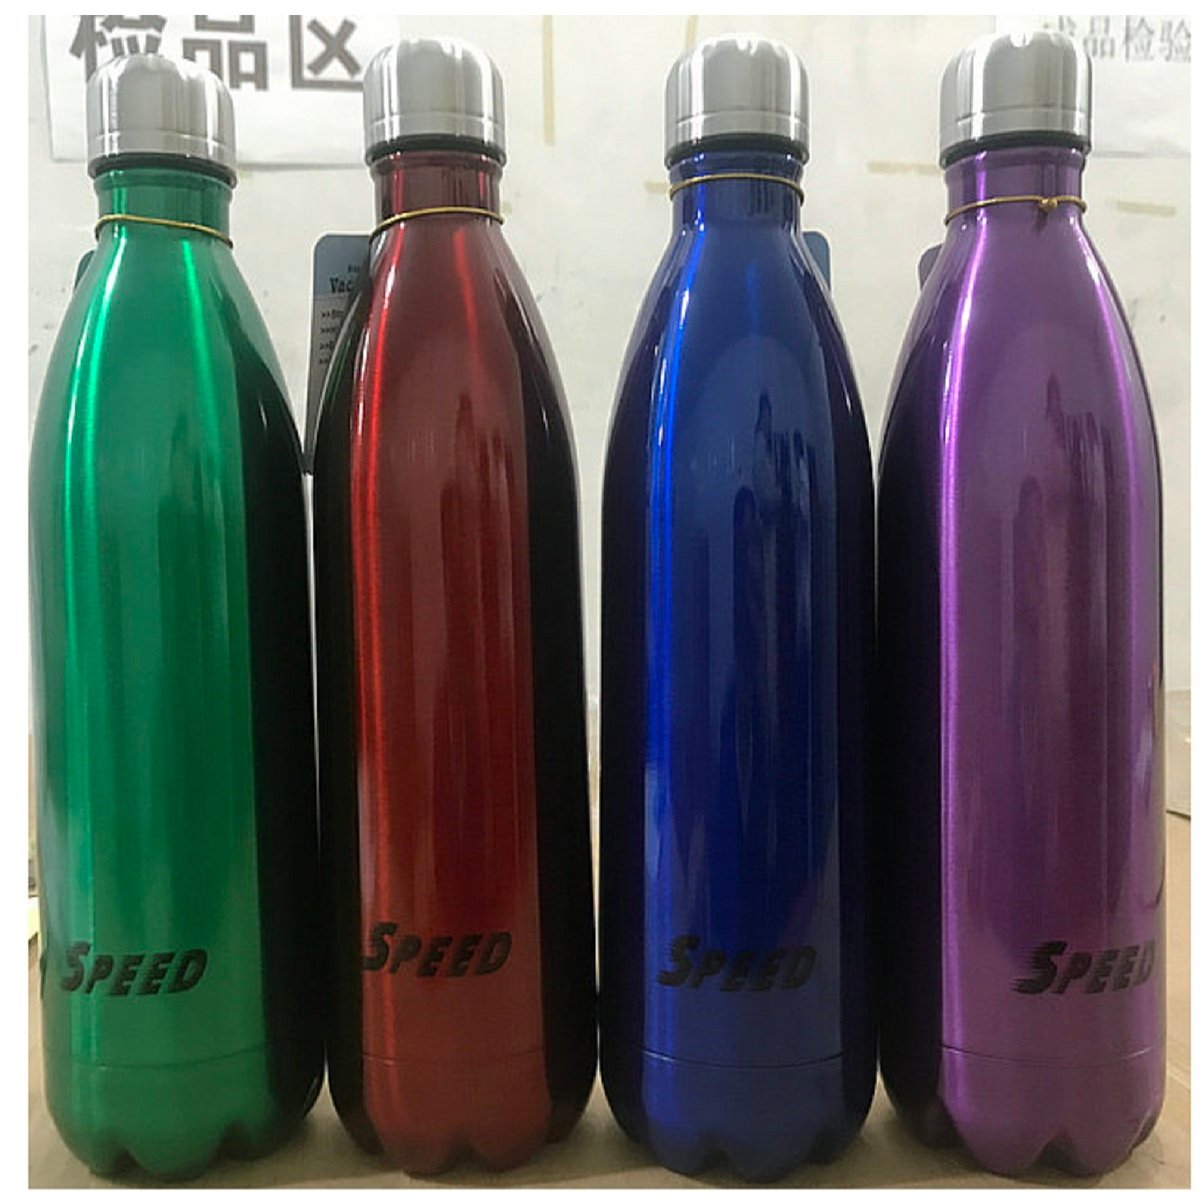 Speed Stainless Steel Vacuum Bottle KL13 750ml Assorted Colors